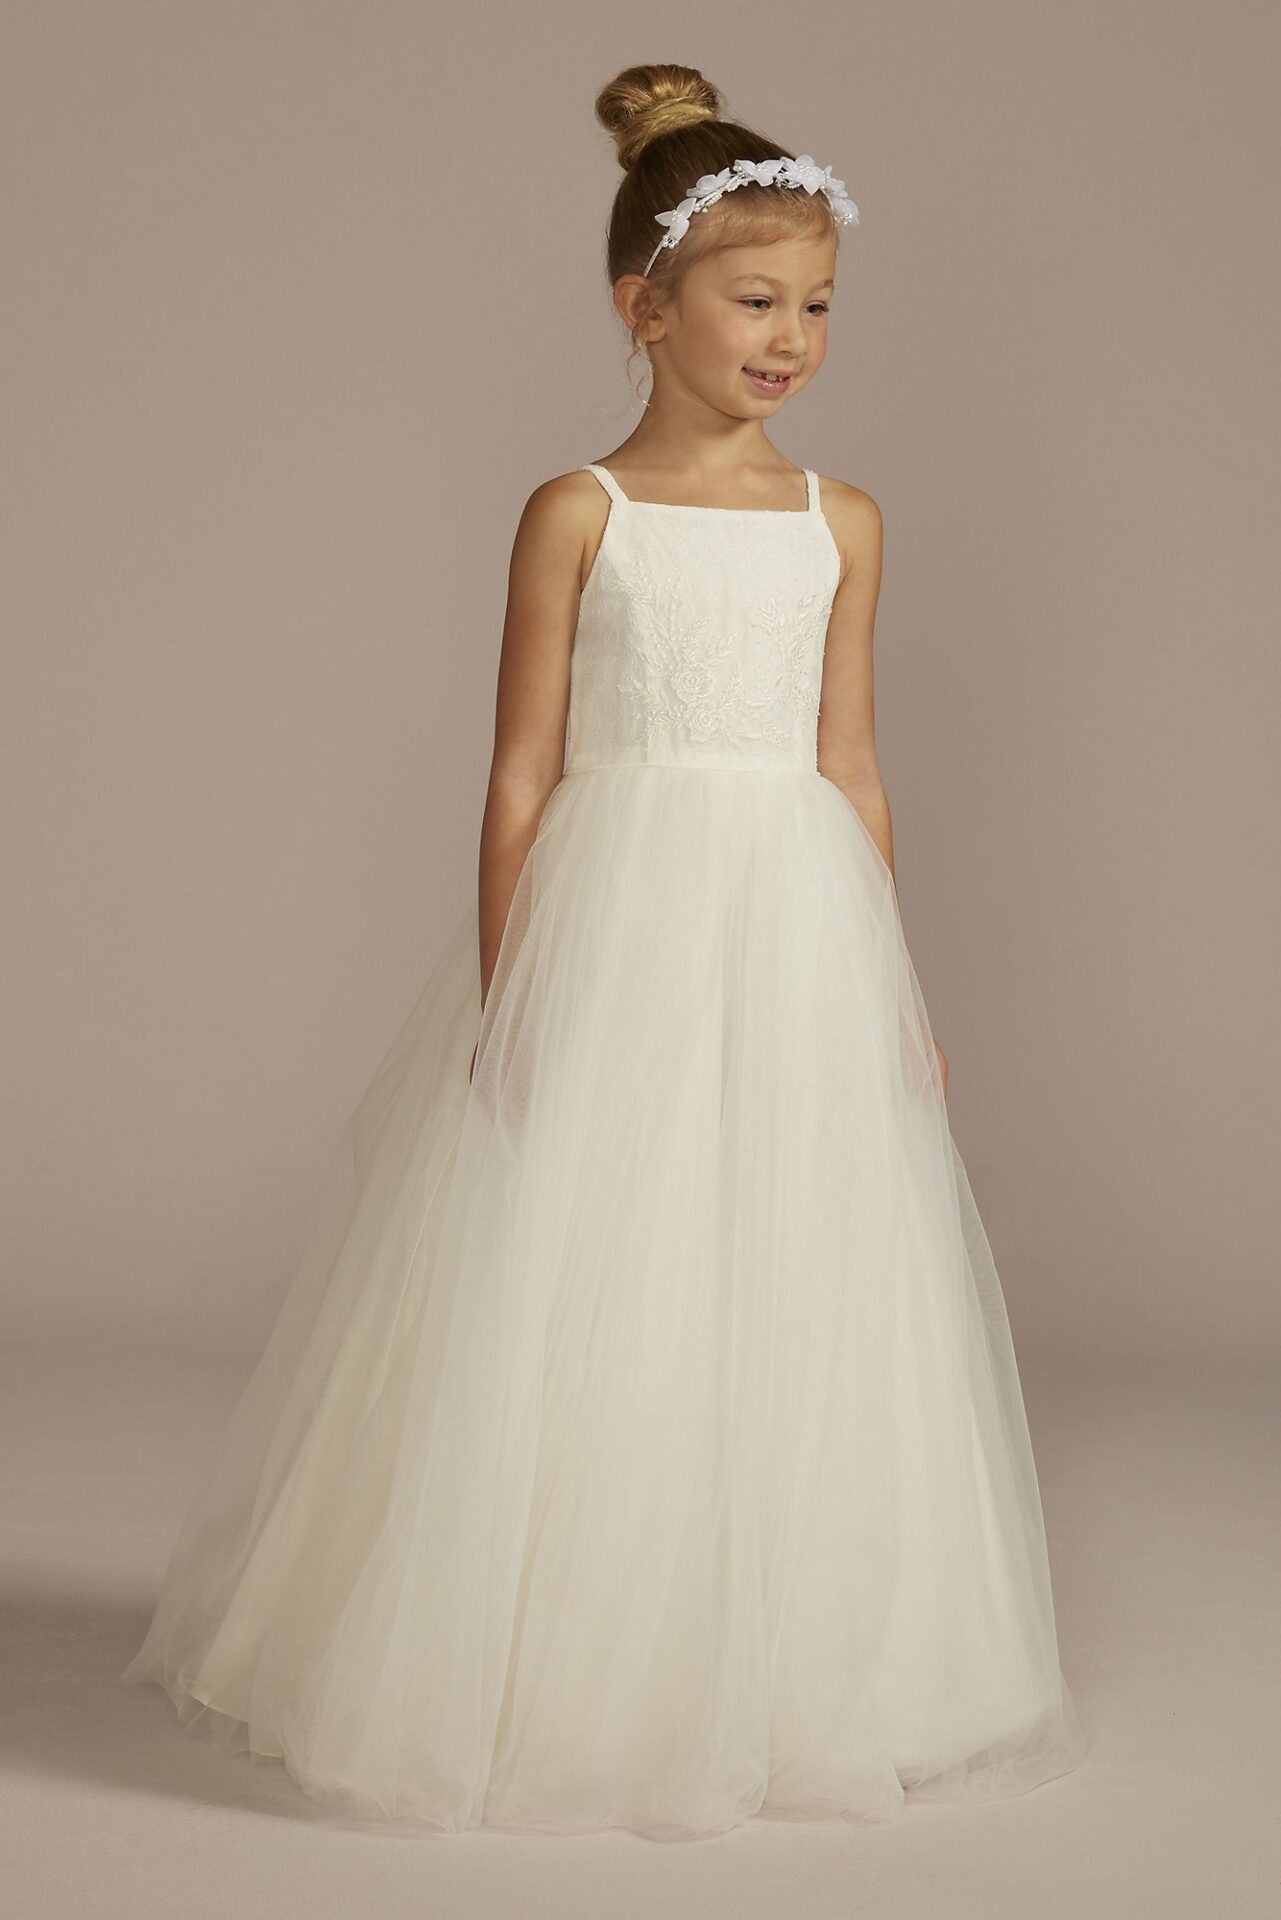 Beaded Lace and Tulle Flower Girl Ball Gown Dress WG1470